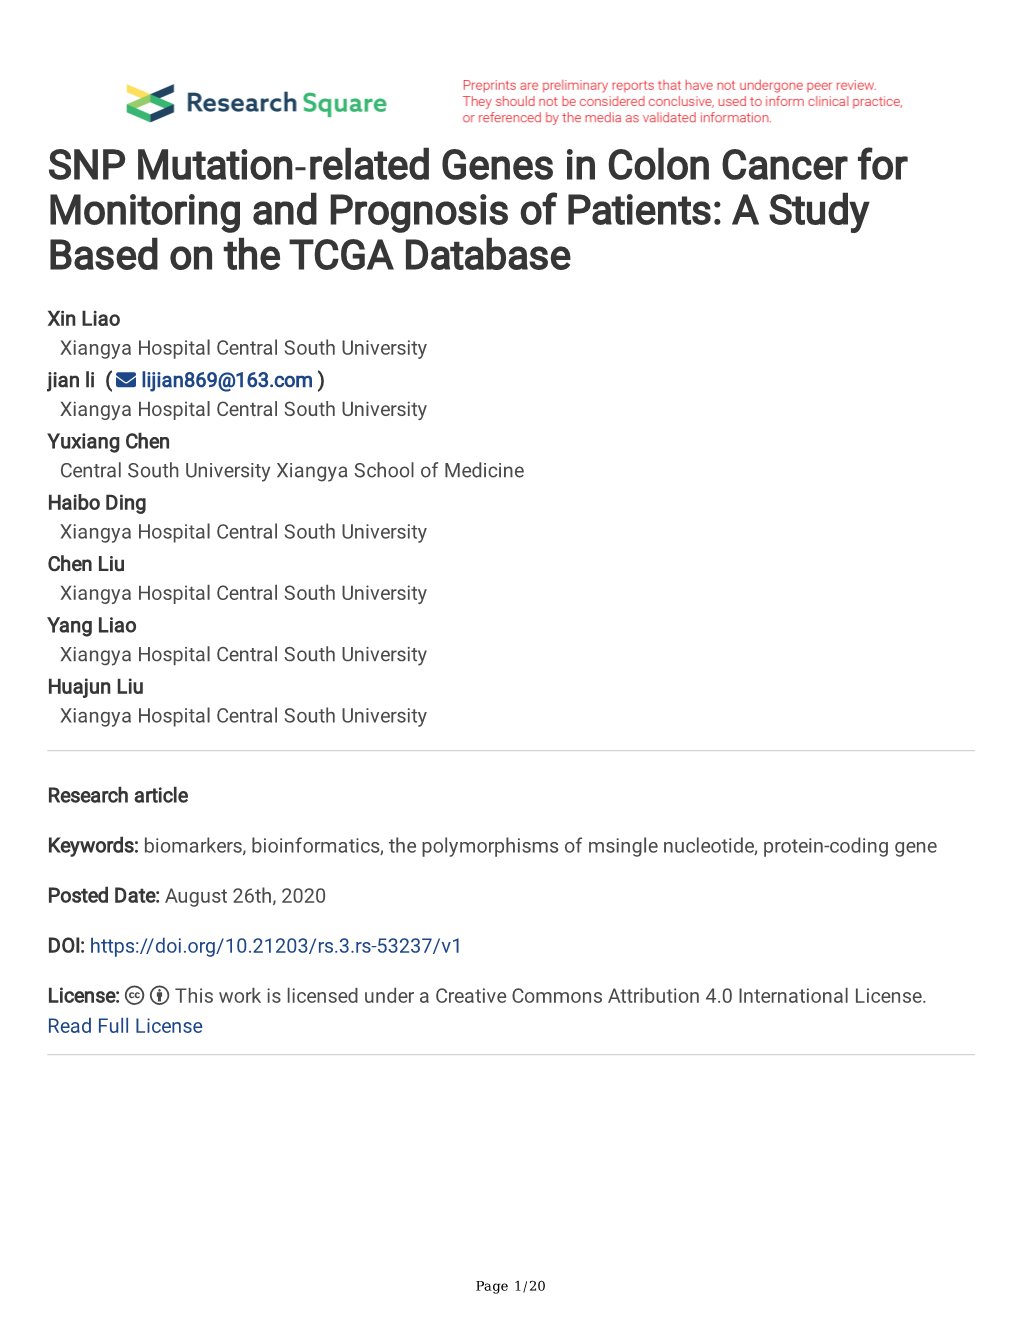 SNP Mutation‐Related Genes in Colon Cancer for Monitoring and Prognosis of Patients: a Study Based on the TCGA Database